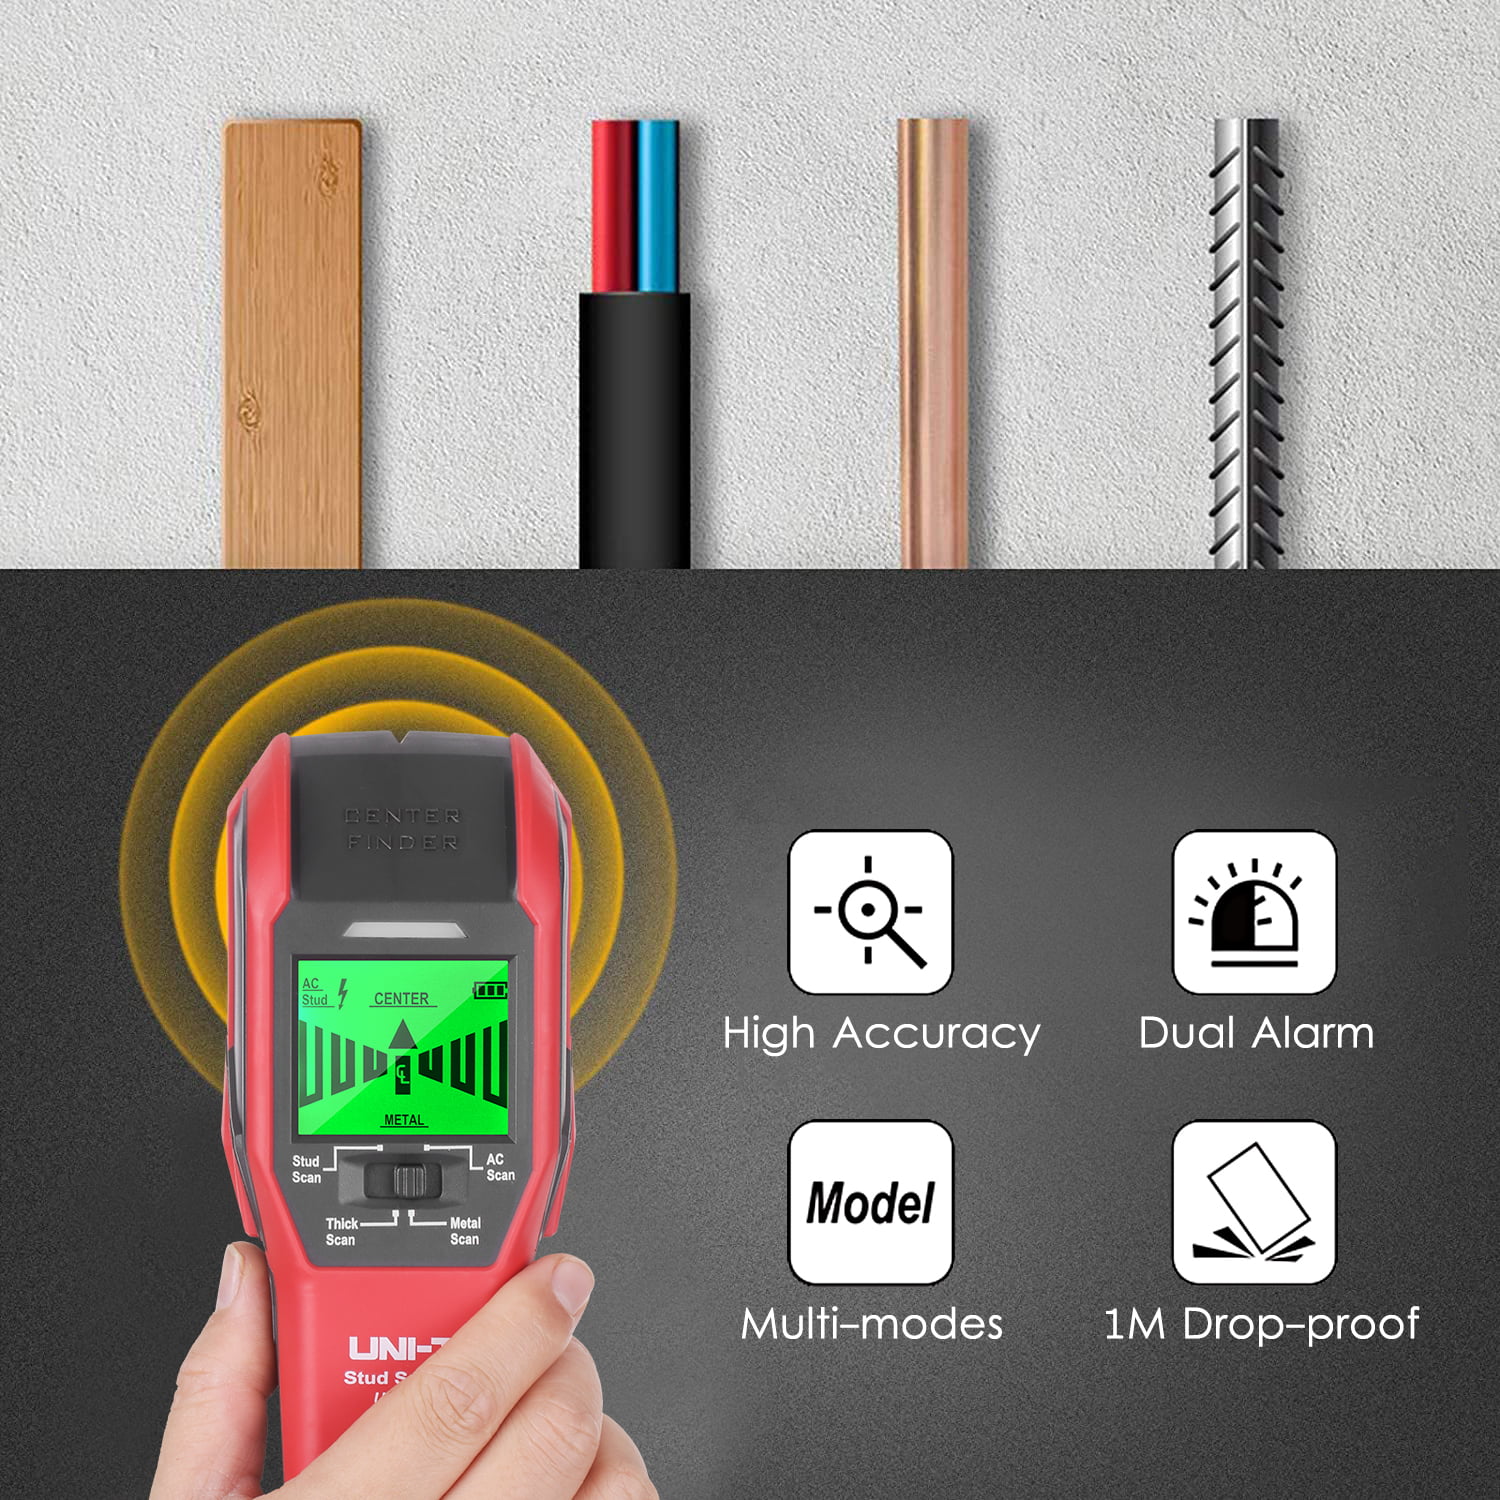 Wall Detector,Stud Finder,Digital Wall Detector,Wood Stud Finding,Multi-Scanner Metal Wood Center Finding Instrument,Supports LED indicating Light,Detection AC Alarm 